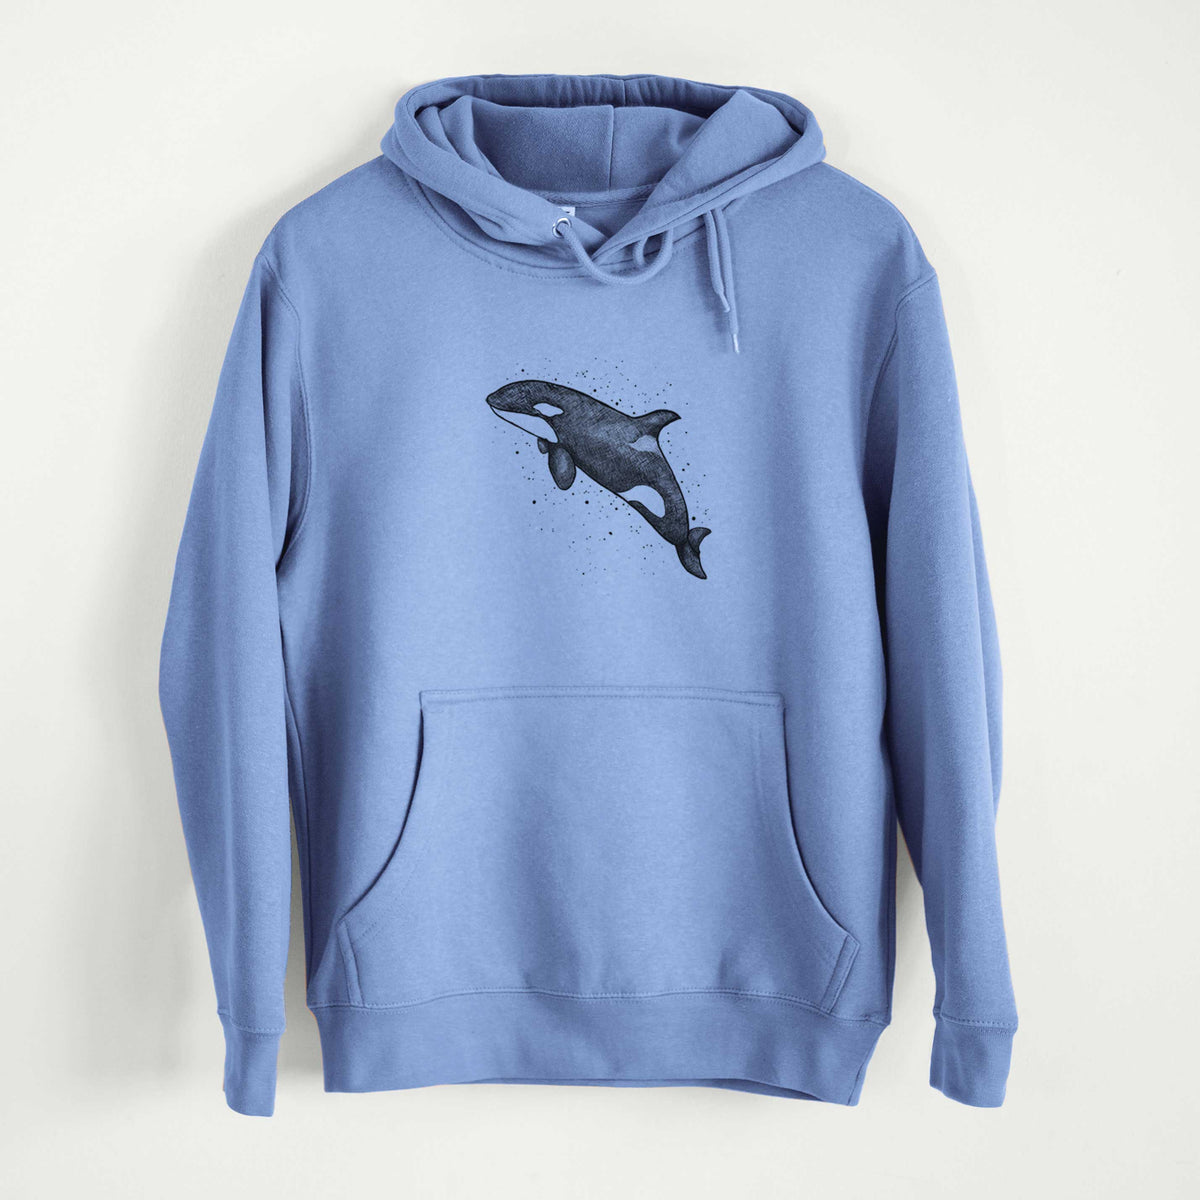 Orca Whale  - Mid-Weight Unisex Premium Blend Hoodie